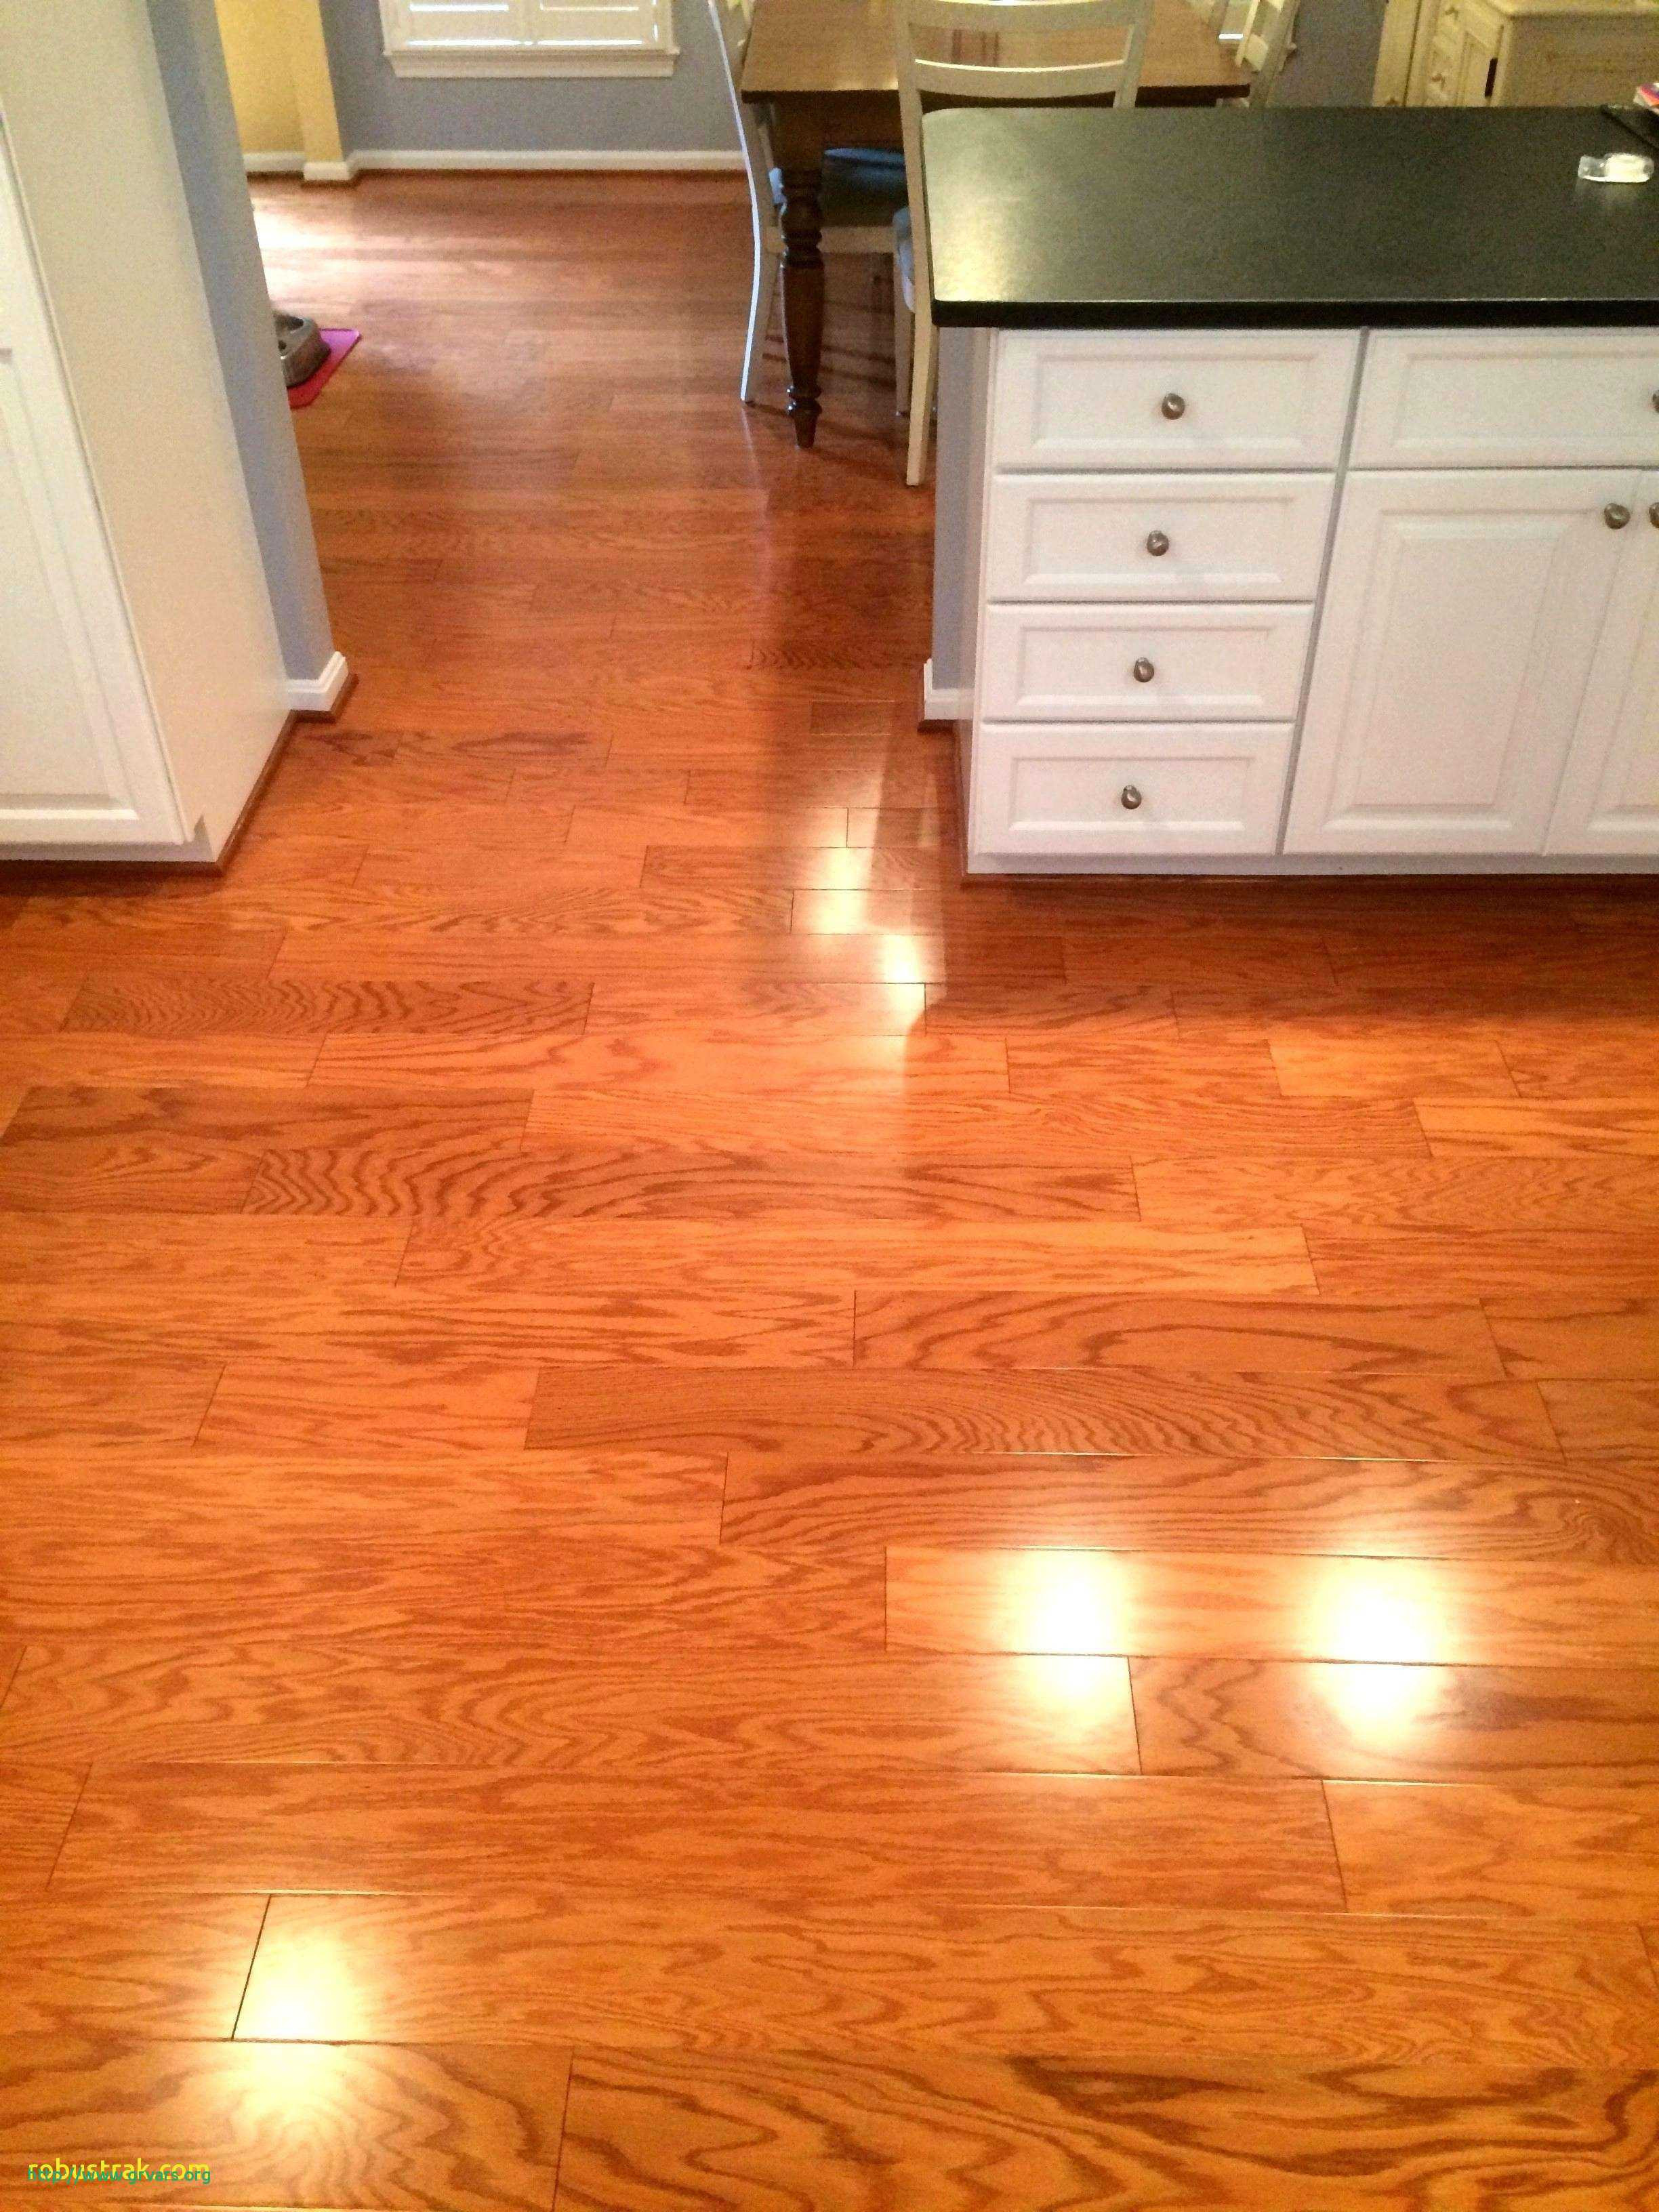 28 Famous Hardwood Floor solutions 2022 free download hardwood floor solutions of 23 frais how much is a hardwood floor ideas blog with hardwood floors in the kitchen fresh where to buy hardwood flooring inspirational 0d grace place barnegat